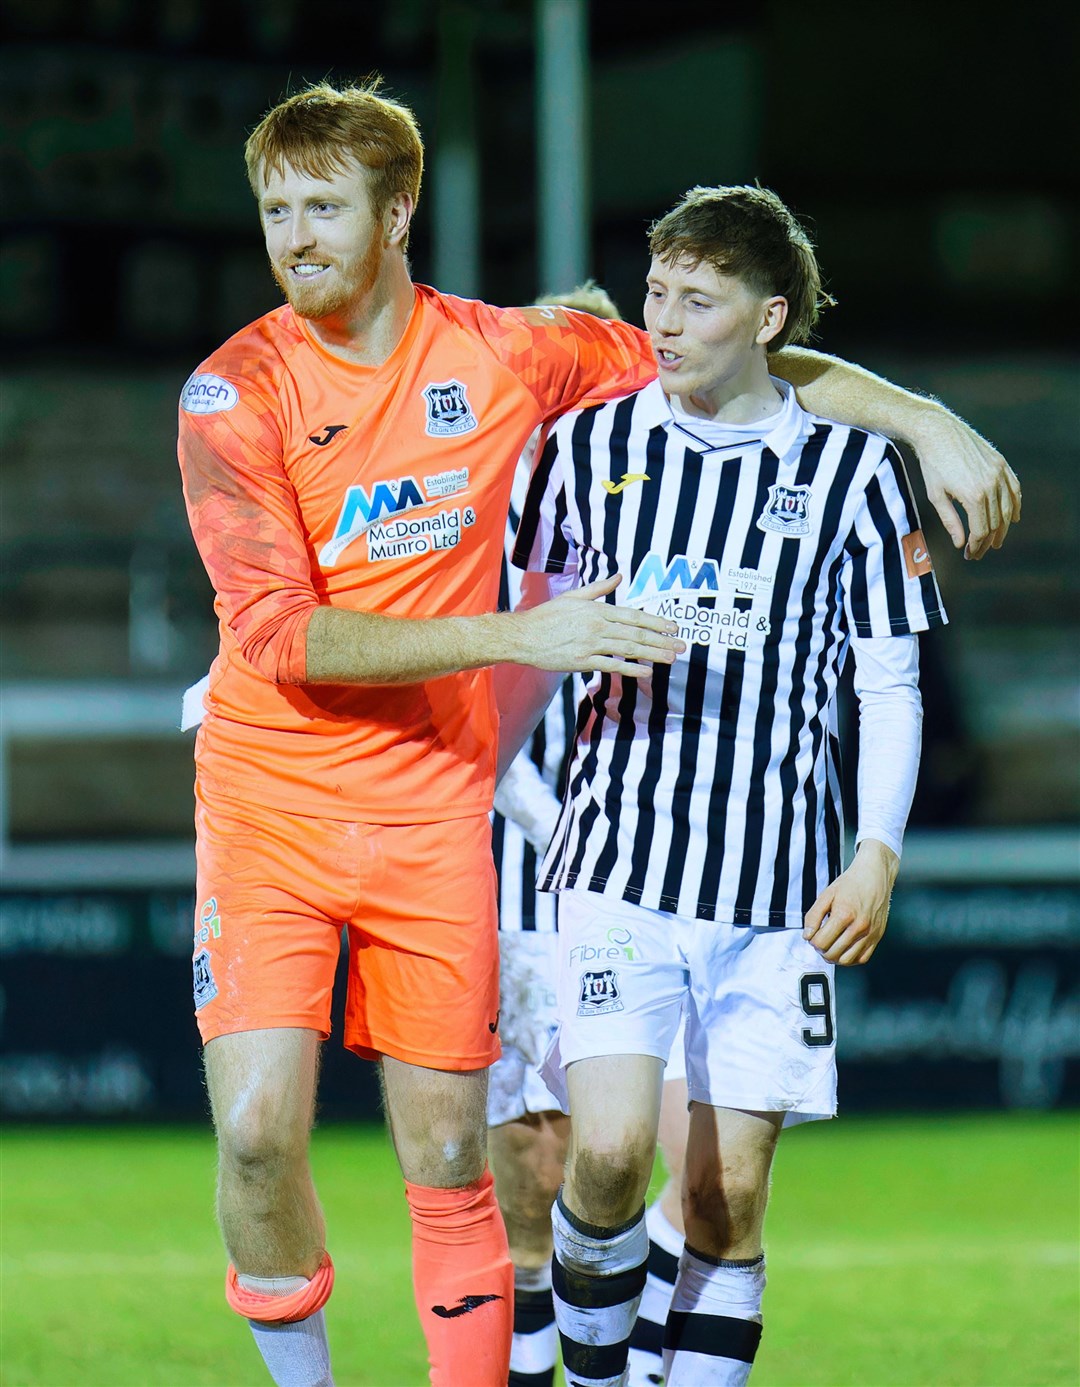 Kane Hester (right) scored his 29th goal of the season in a crucial Elgin City win. Photo: Bob Crombie